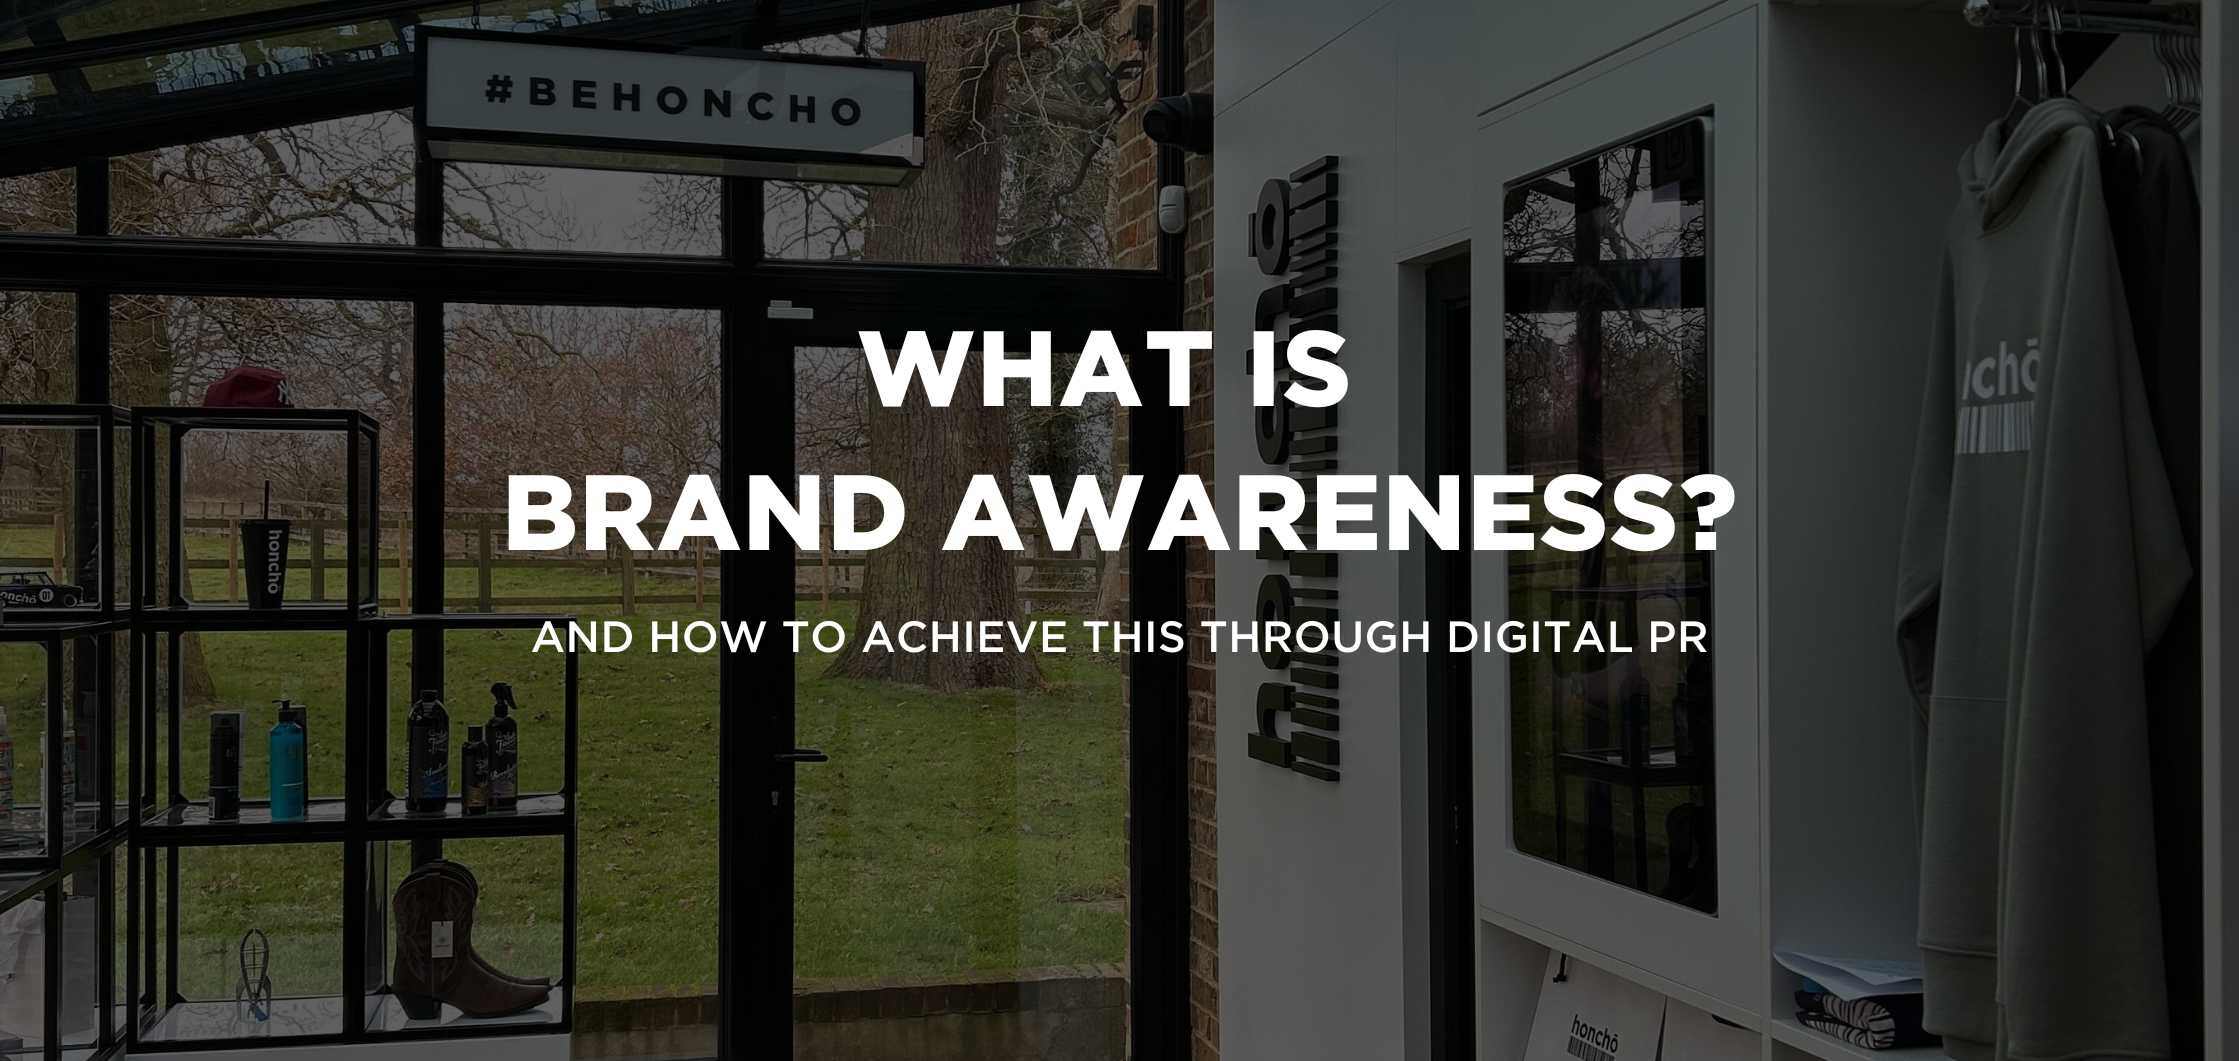 What is brand awareness?